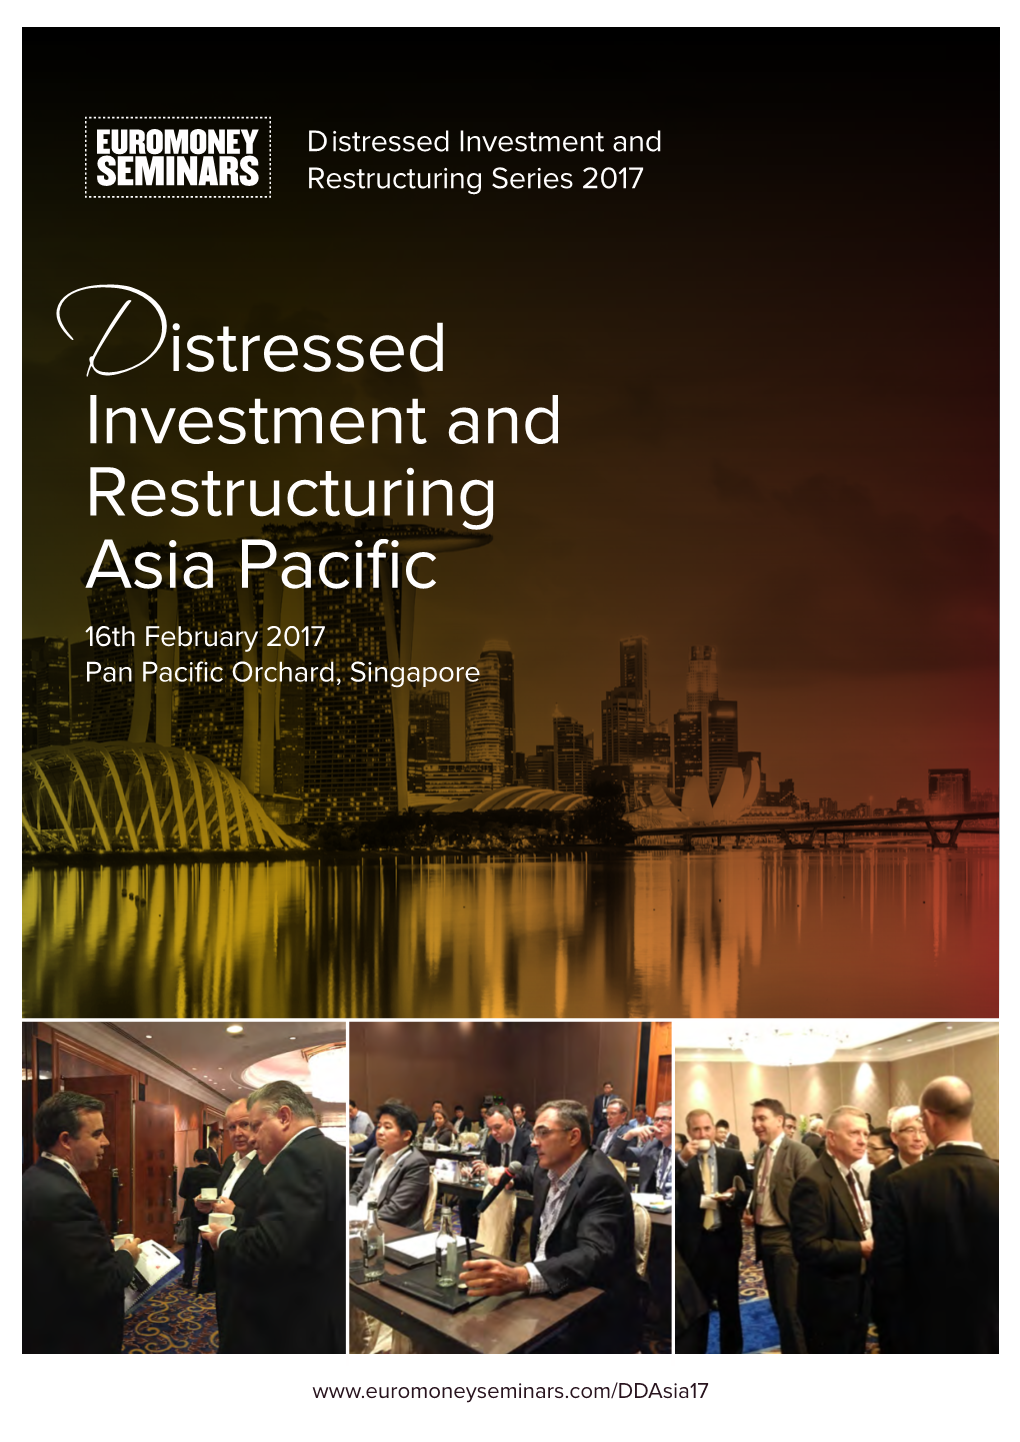 Distressed Investment and Restructuring Asia Pacific • 16Th February 2017, Pan Pacific Orchard, Singapore